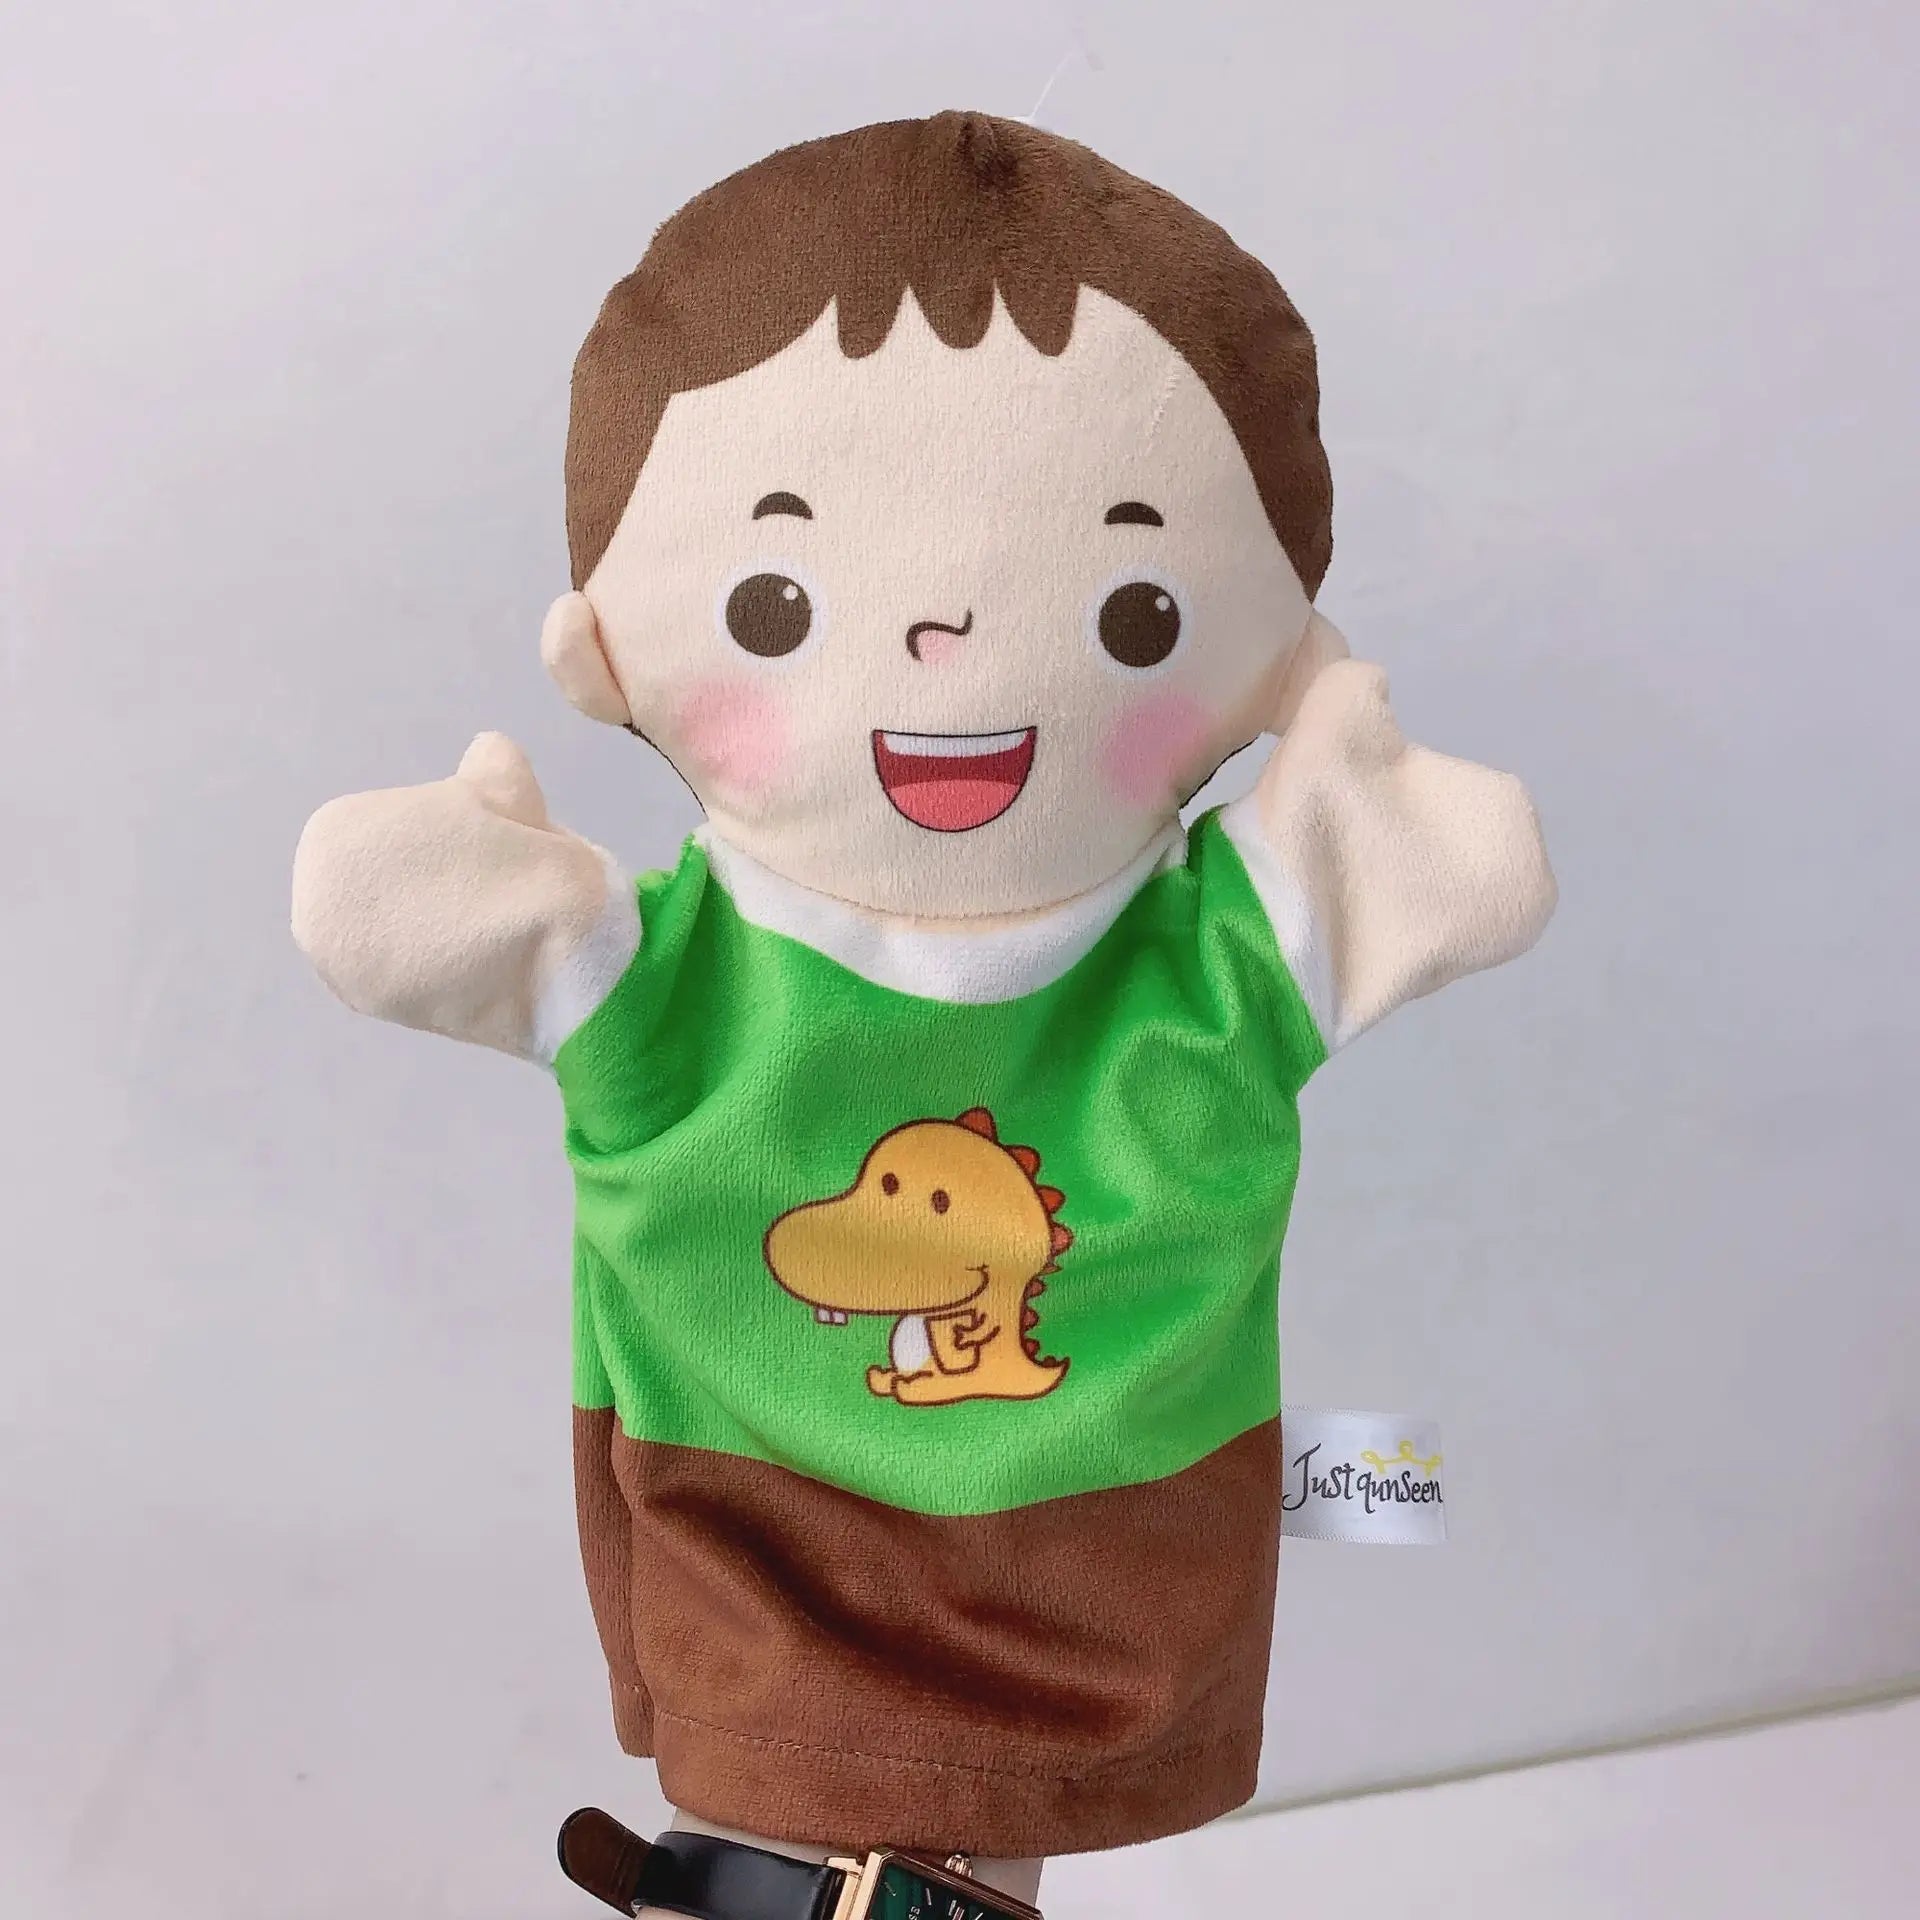 Kids Plush Finger and Hand Puppet - Interactive Role Play Toy - ToylandEU